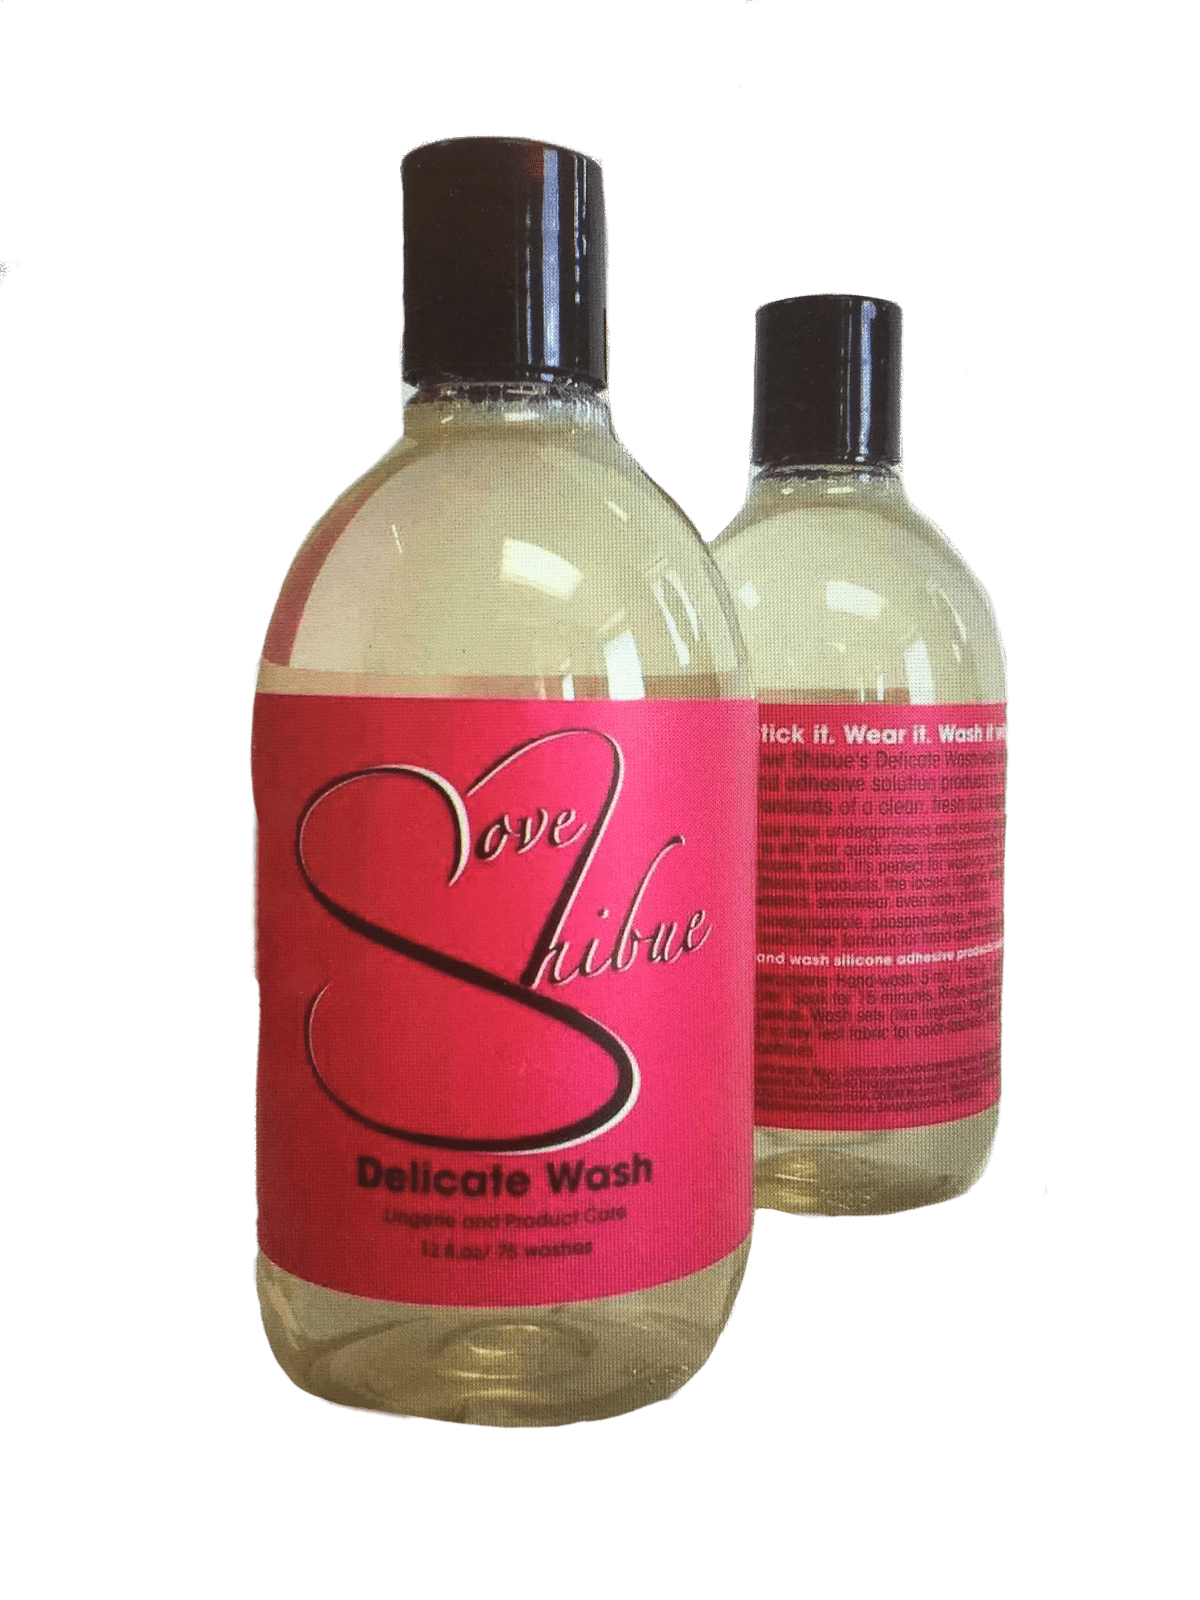 Delicate Wash Shibue Couture Cosmetic Tool Cleansers